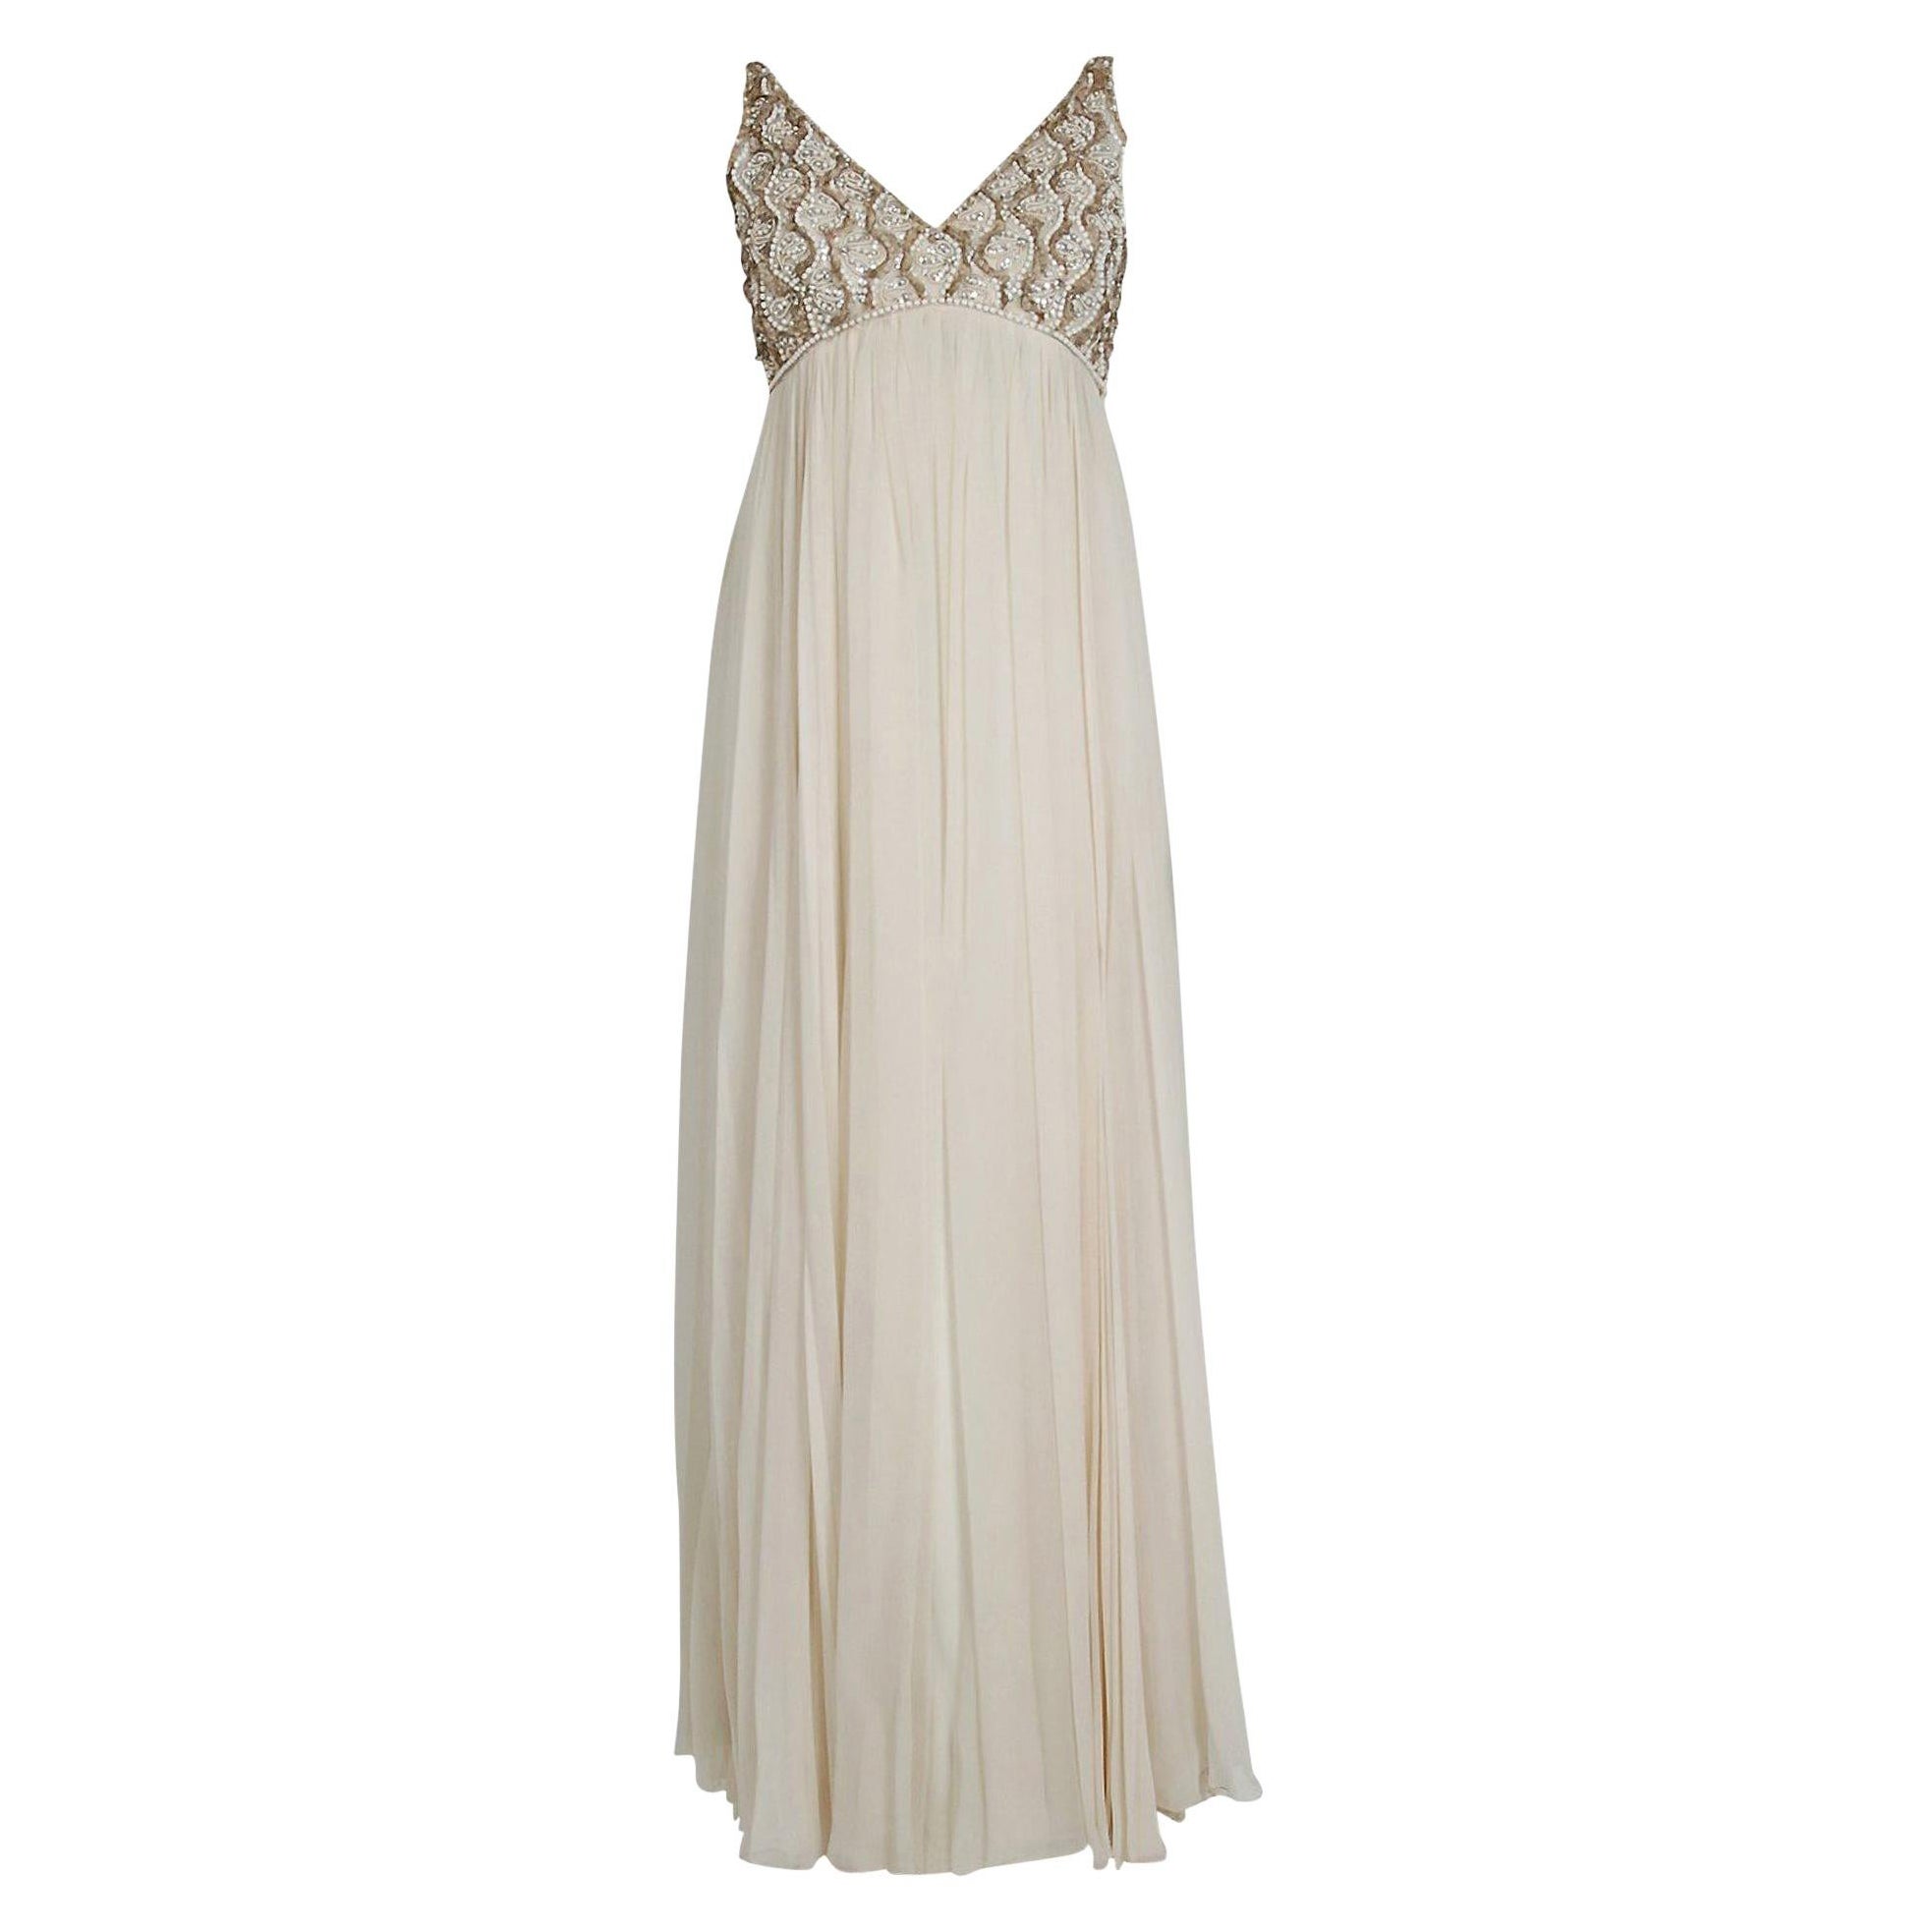 Vintage 1960's Malcolm Starr Beaded Ivory Chiffon Empire Goddess Bridal Gown